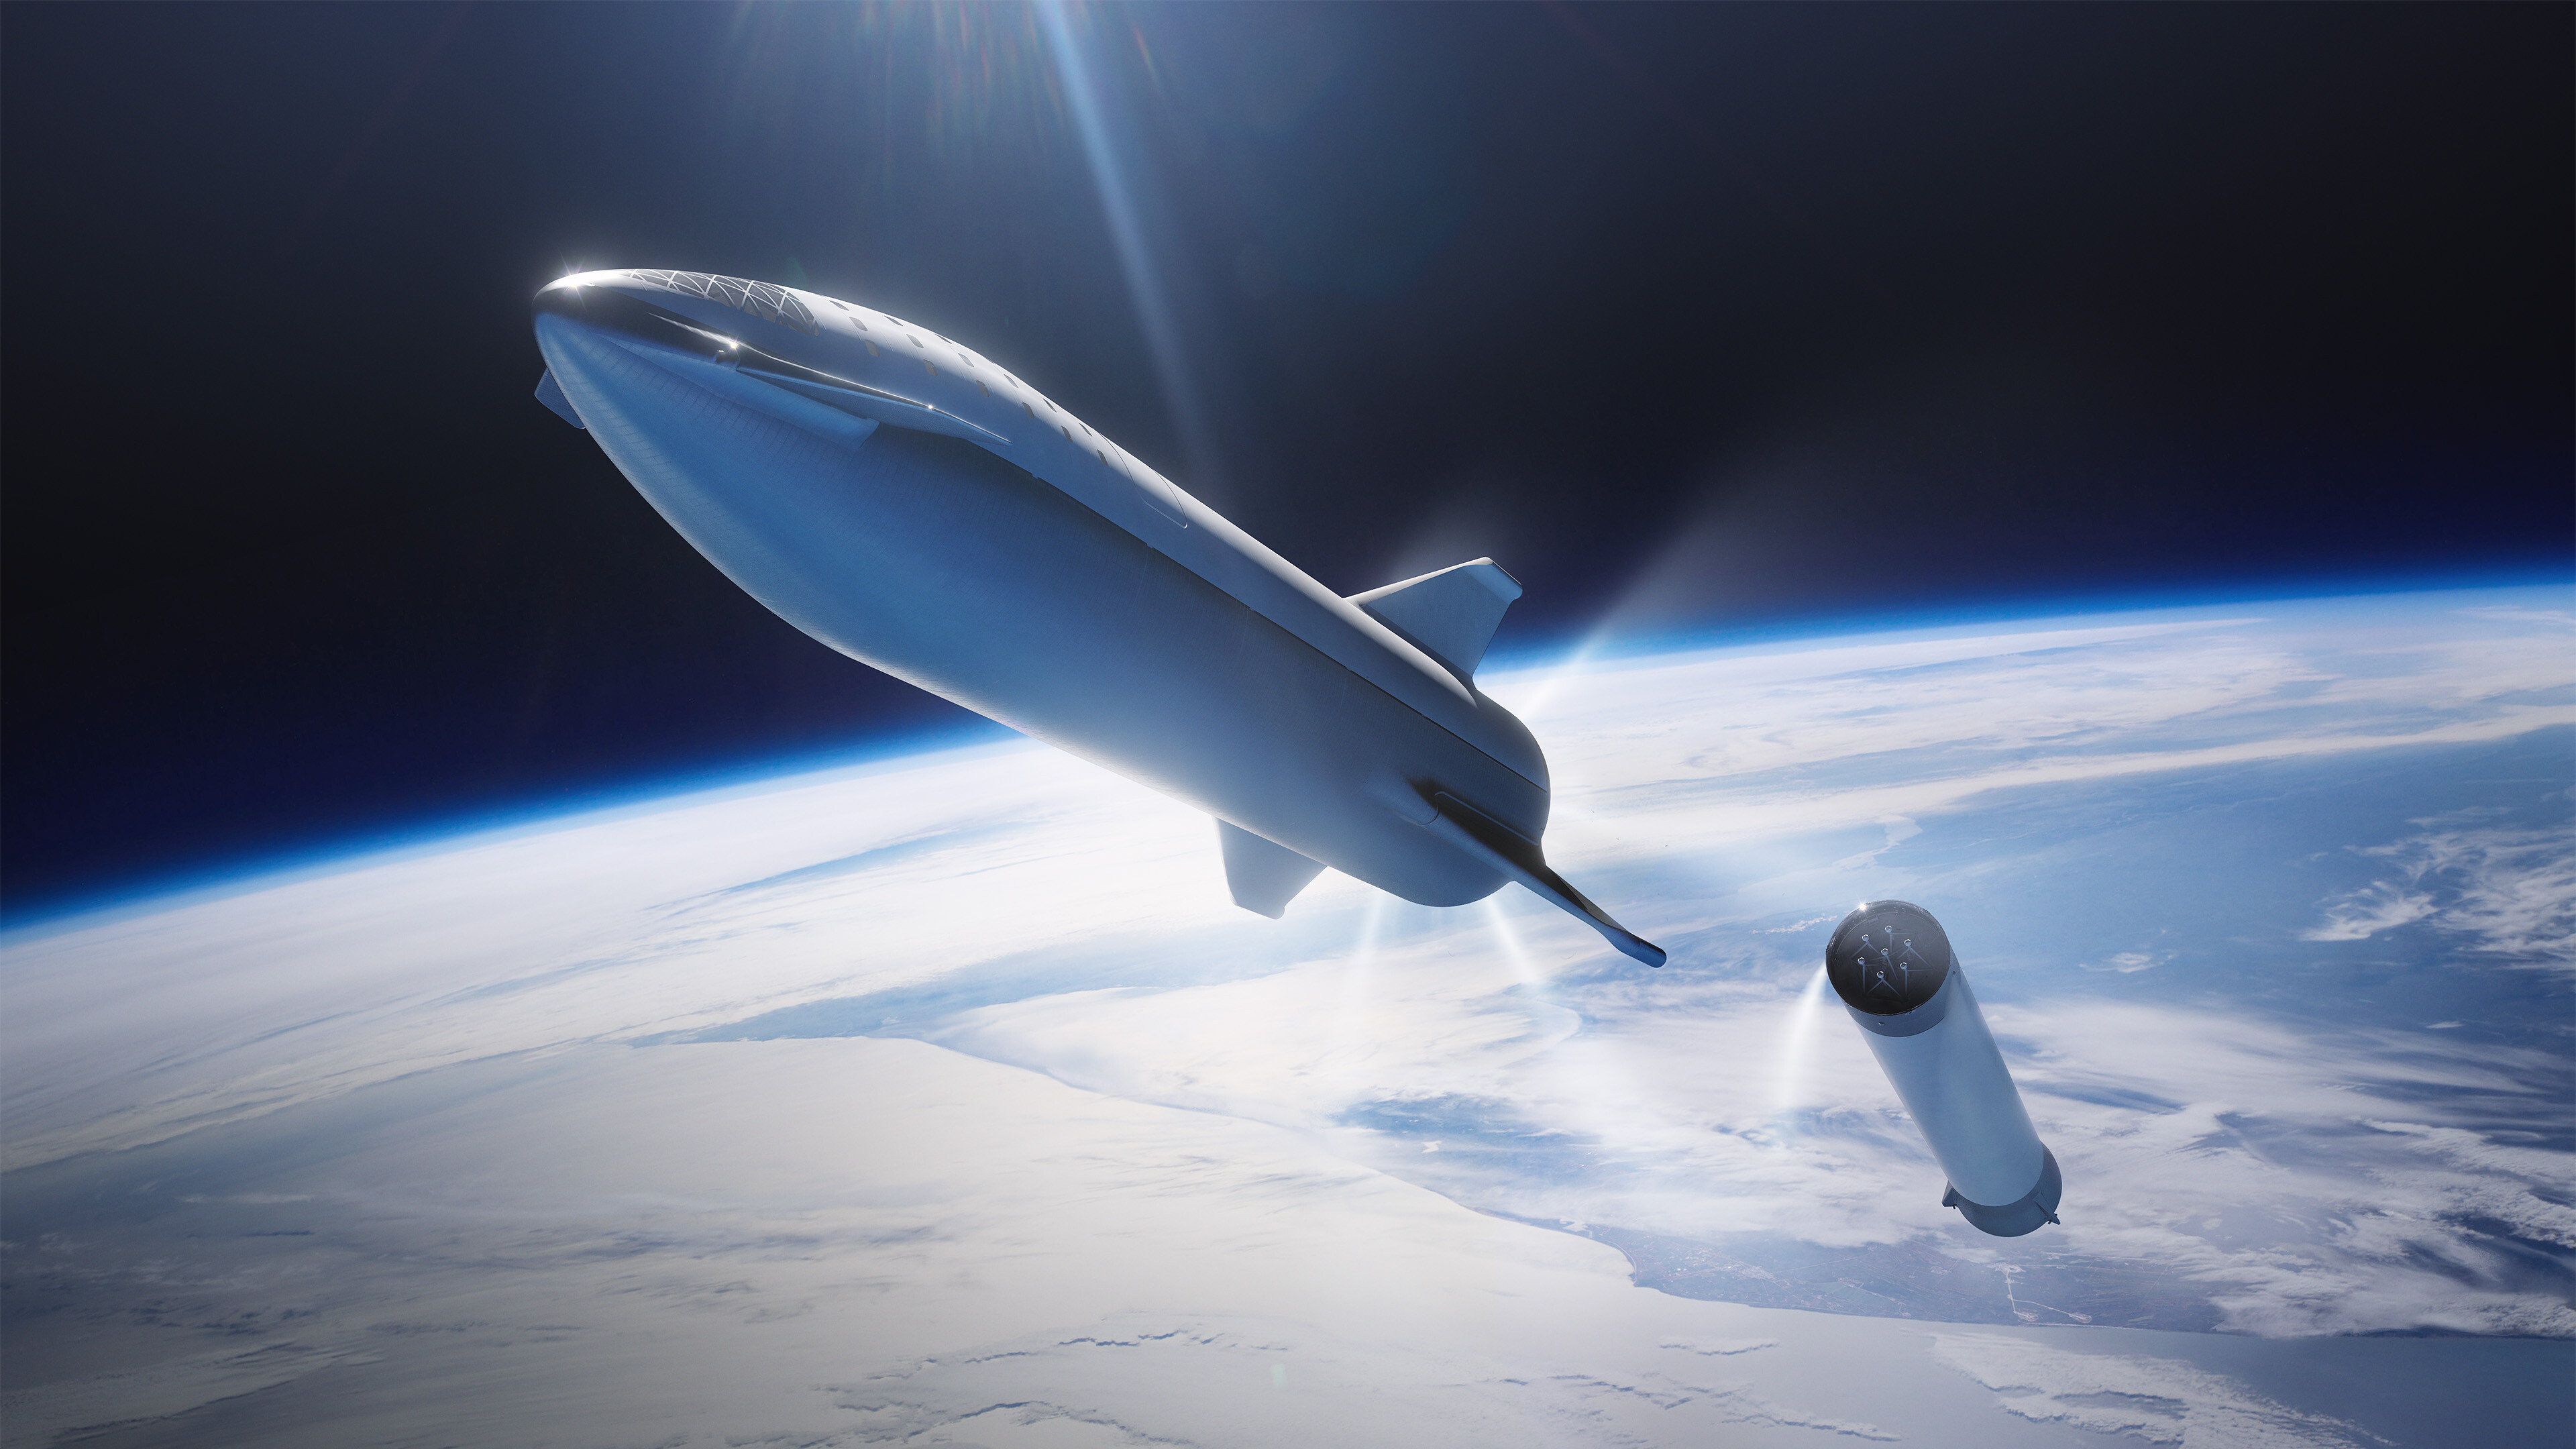 SpaceX: Starship, a fully reusable, super heavy-lift launch vehicle, BFR. 3840x2160 4K Wallpaper.